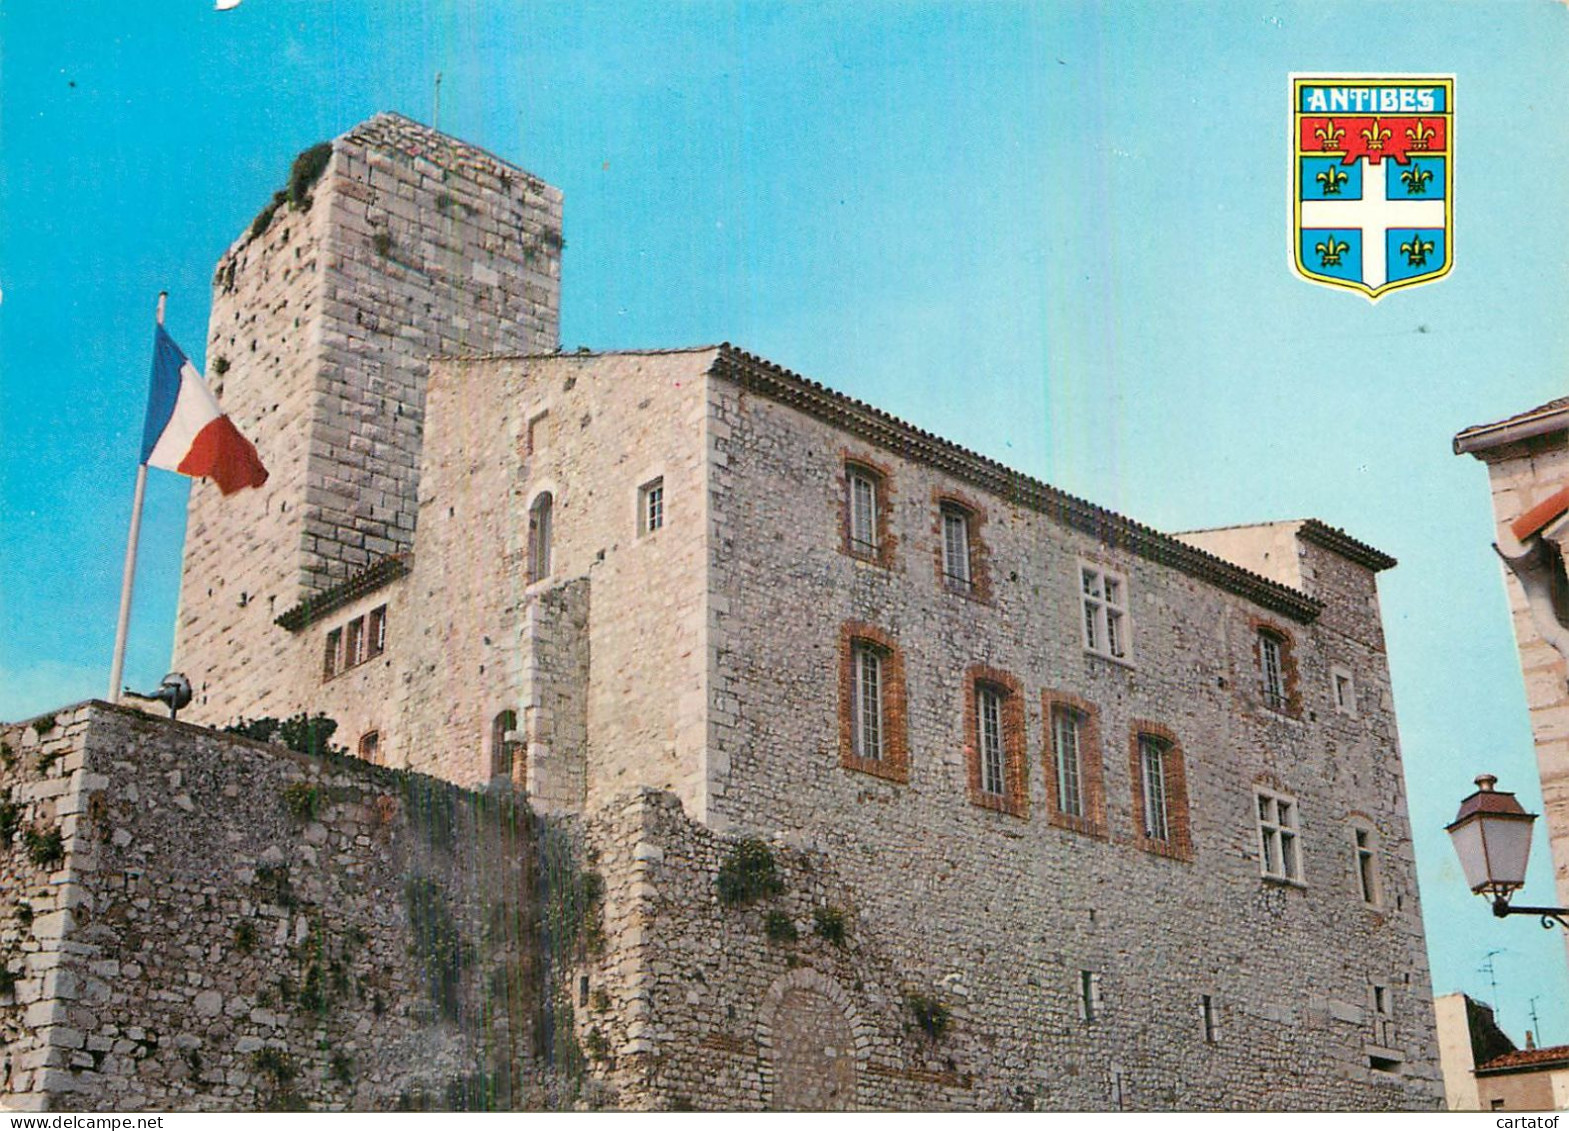 ANTIBES . Château Musée Picasso - Antibes - Oude Stad